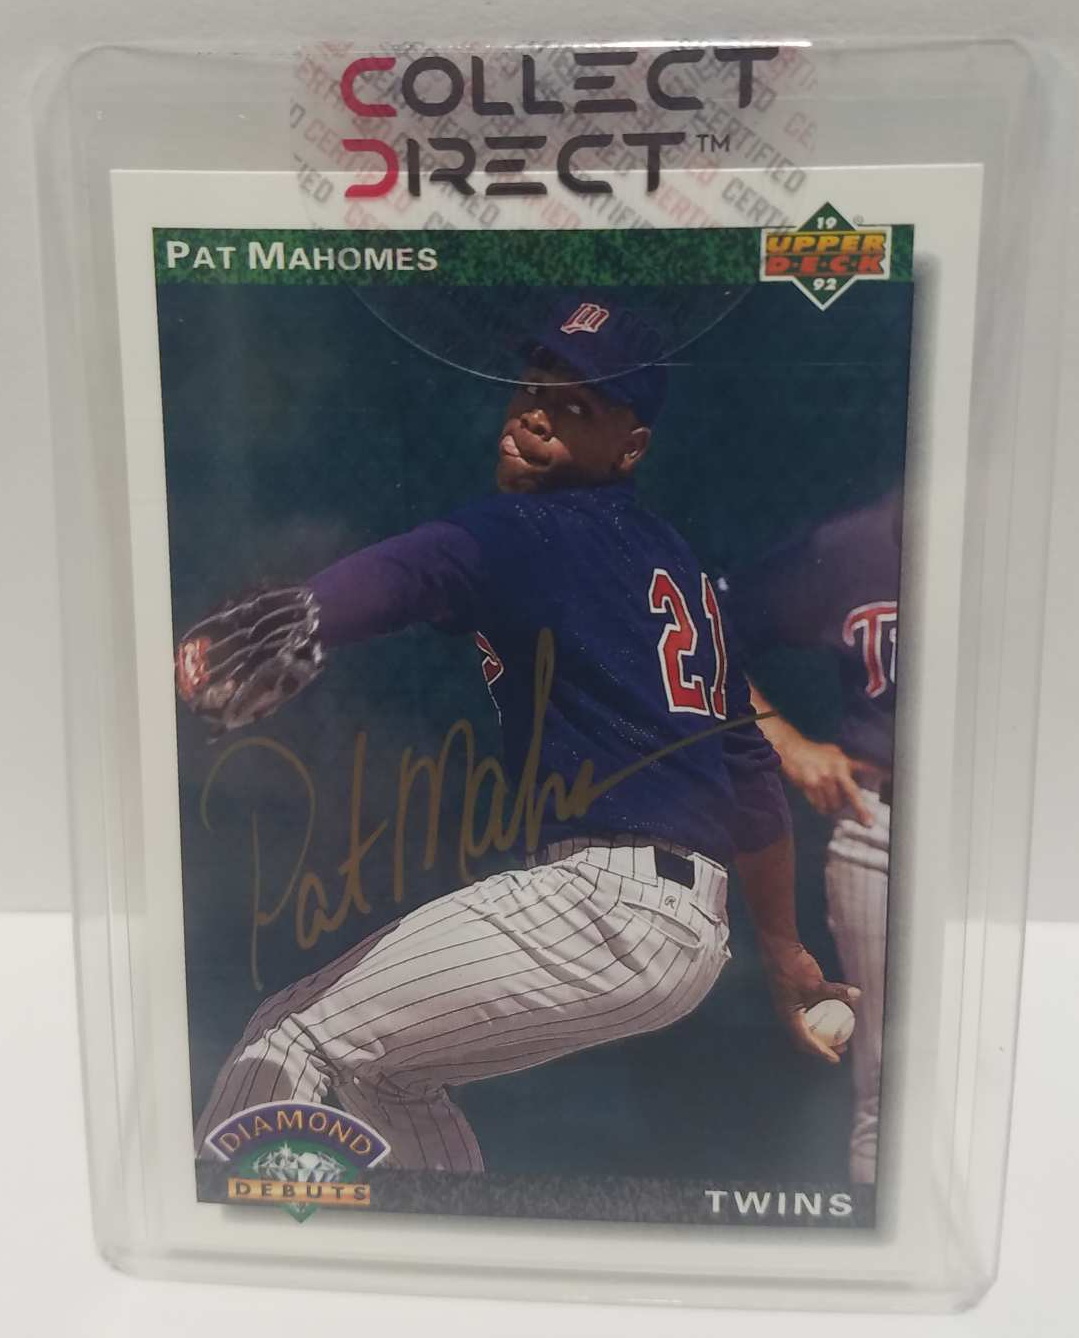 PAT Mahomes Autographed 1992 Upper Deck Diamond Debuts Rookie Card Signed Minnesota Twins Father of Patrick Mahomes Kansas City Chiefs